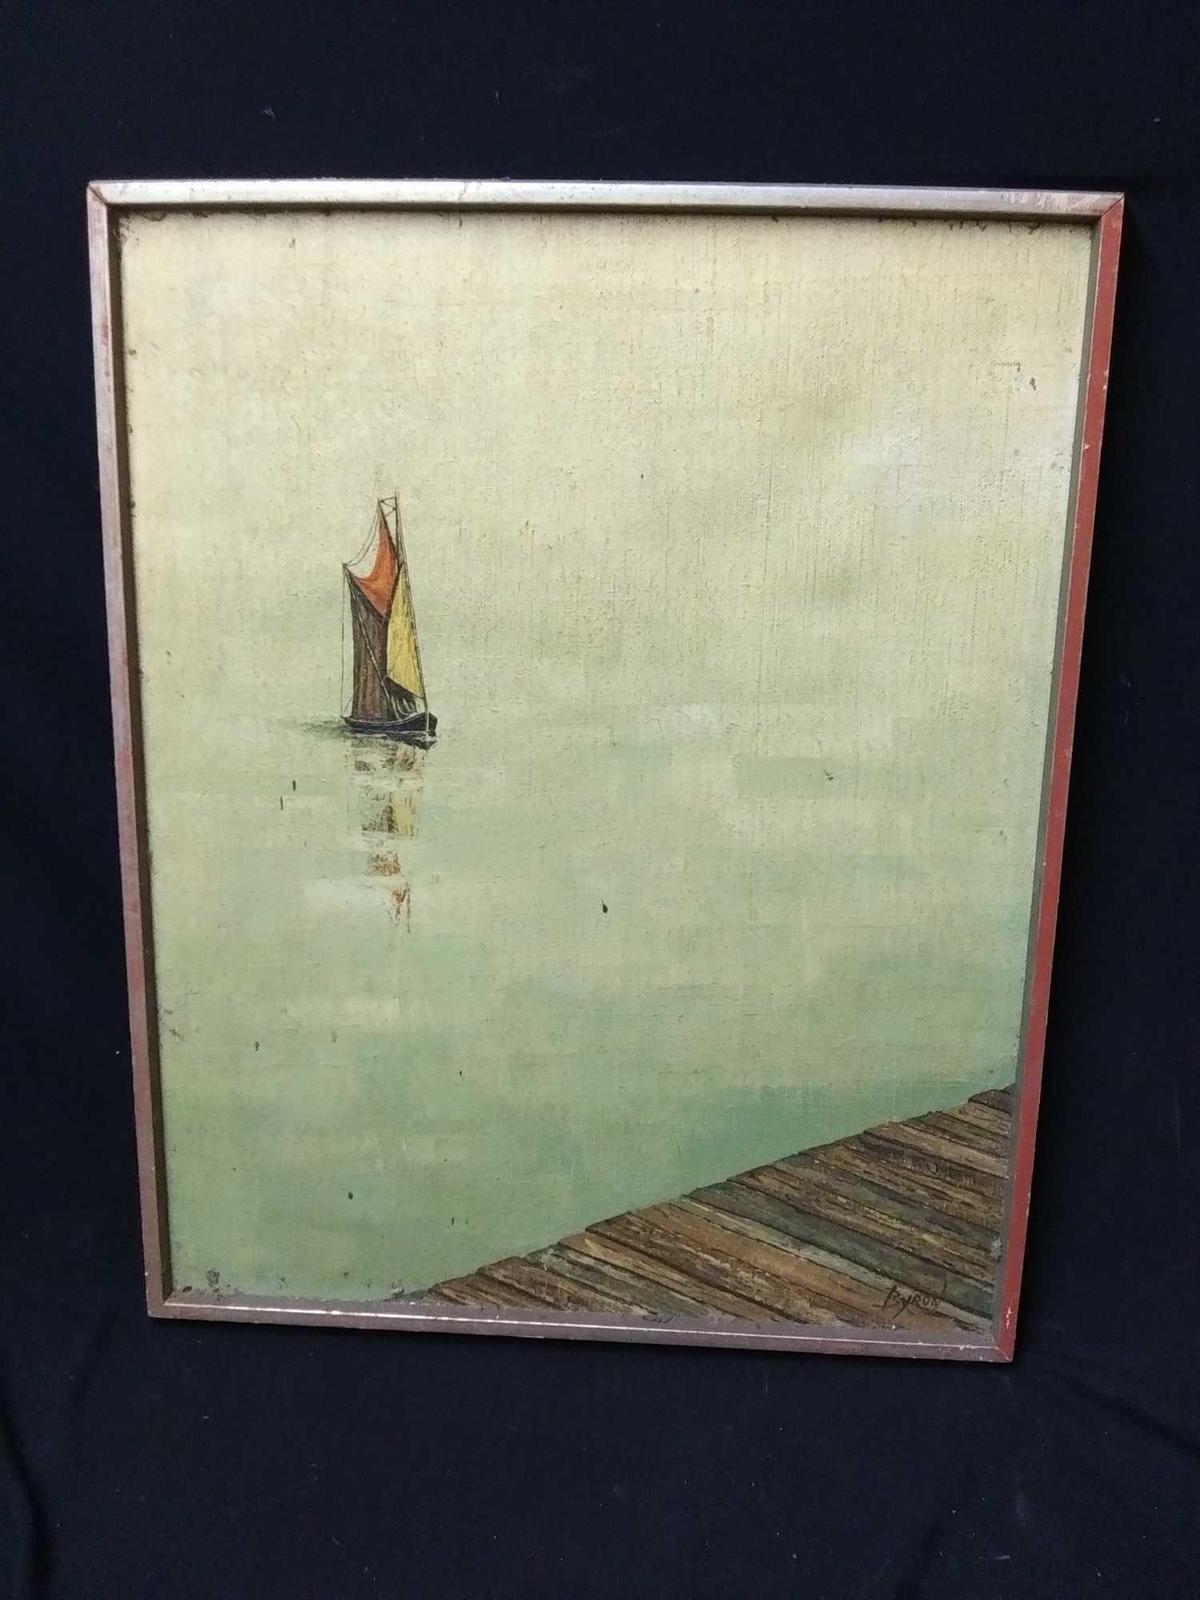 Small sailboat on calm water, painting signed Byron